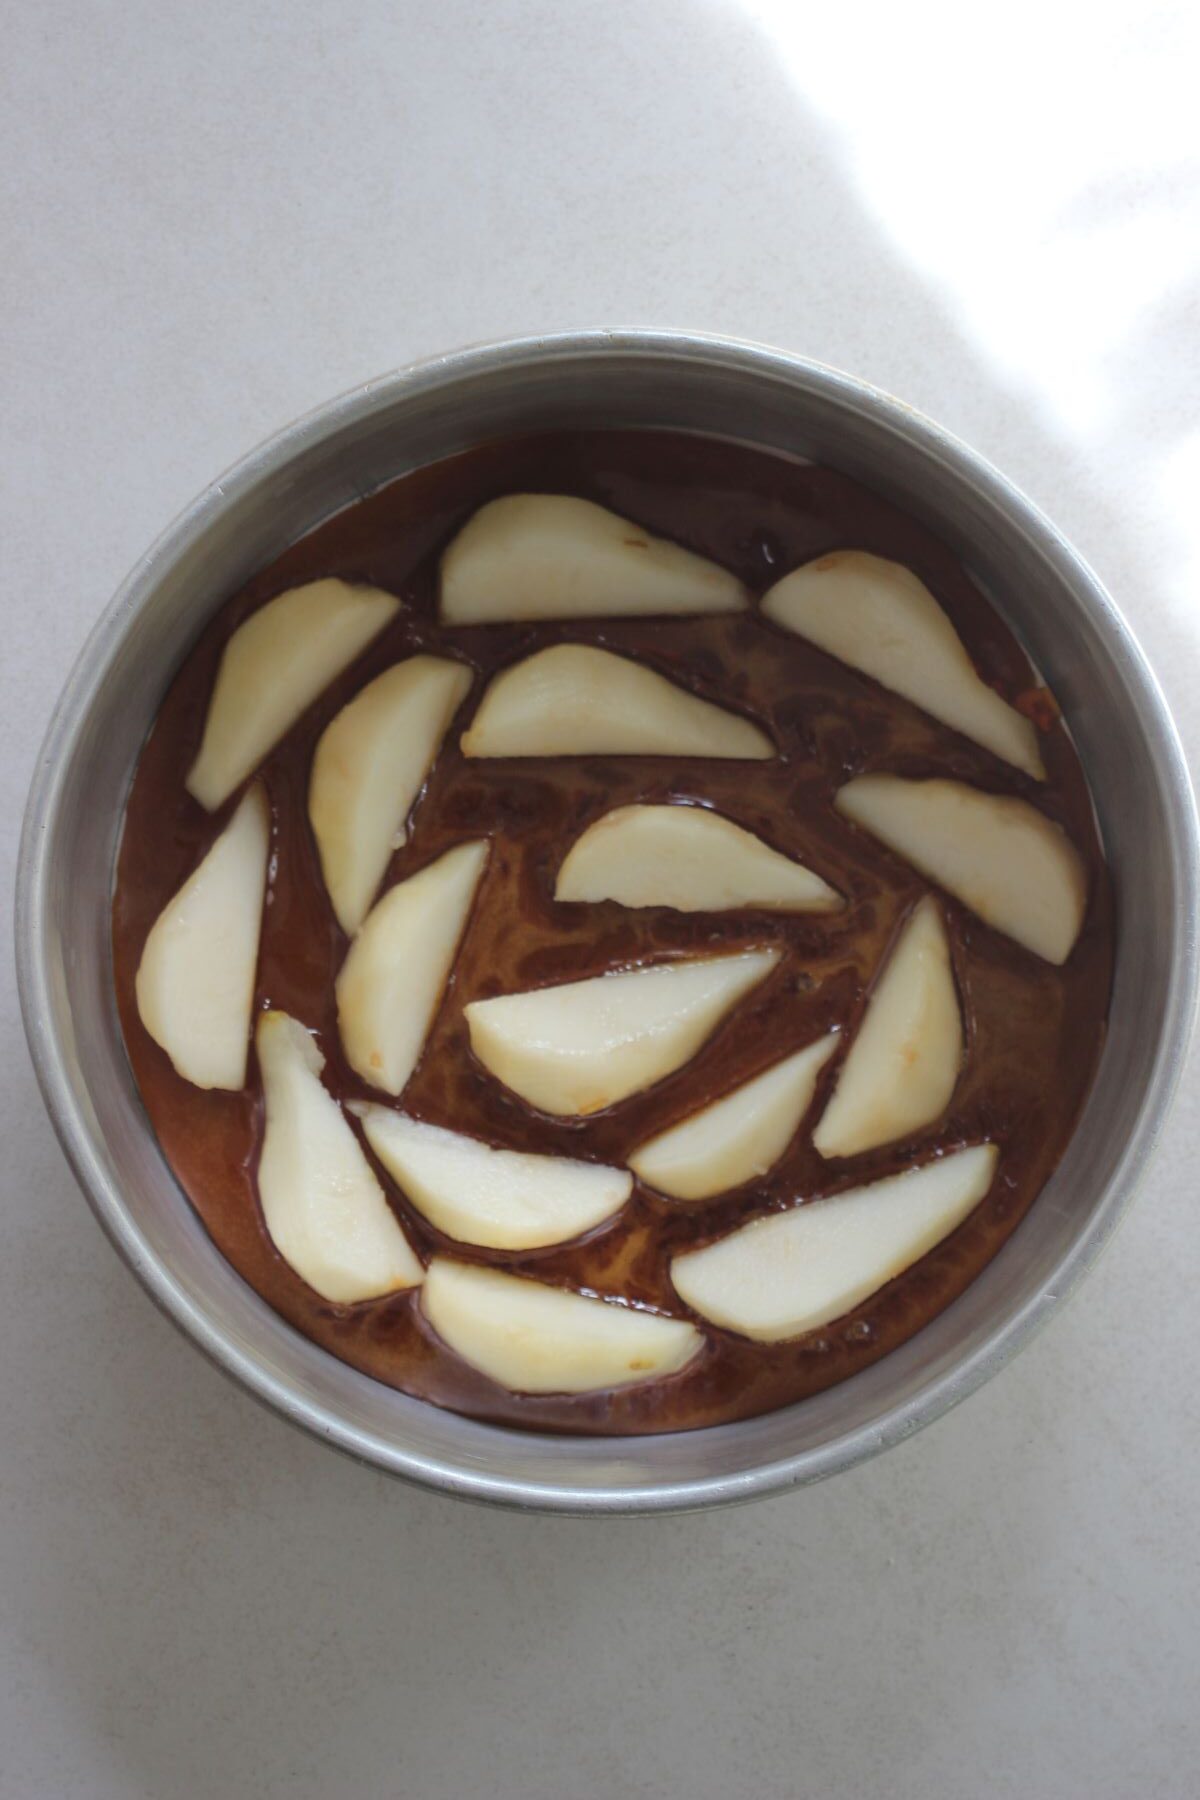 Cake pan with caramel and pear slices.